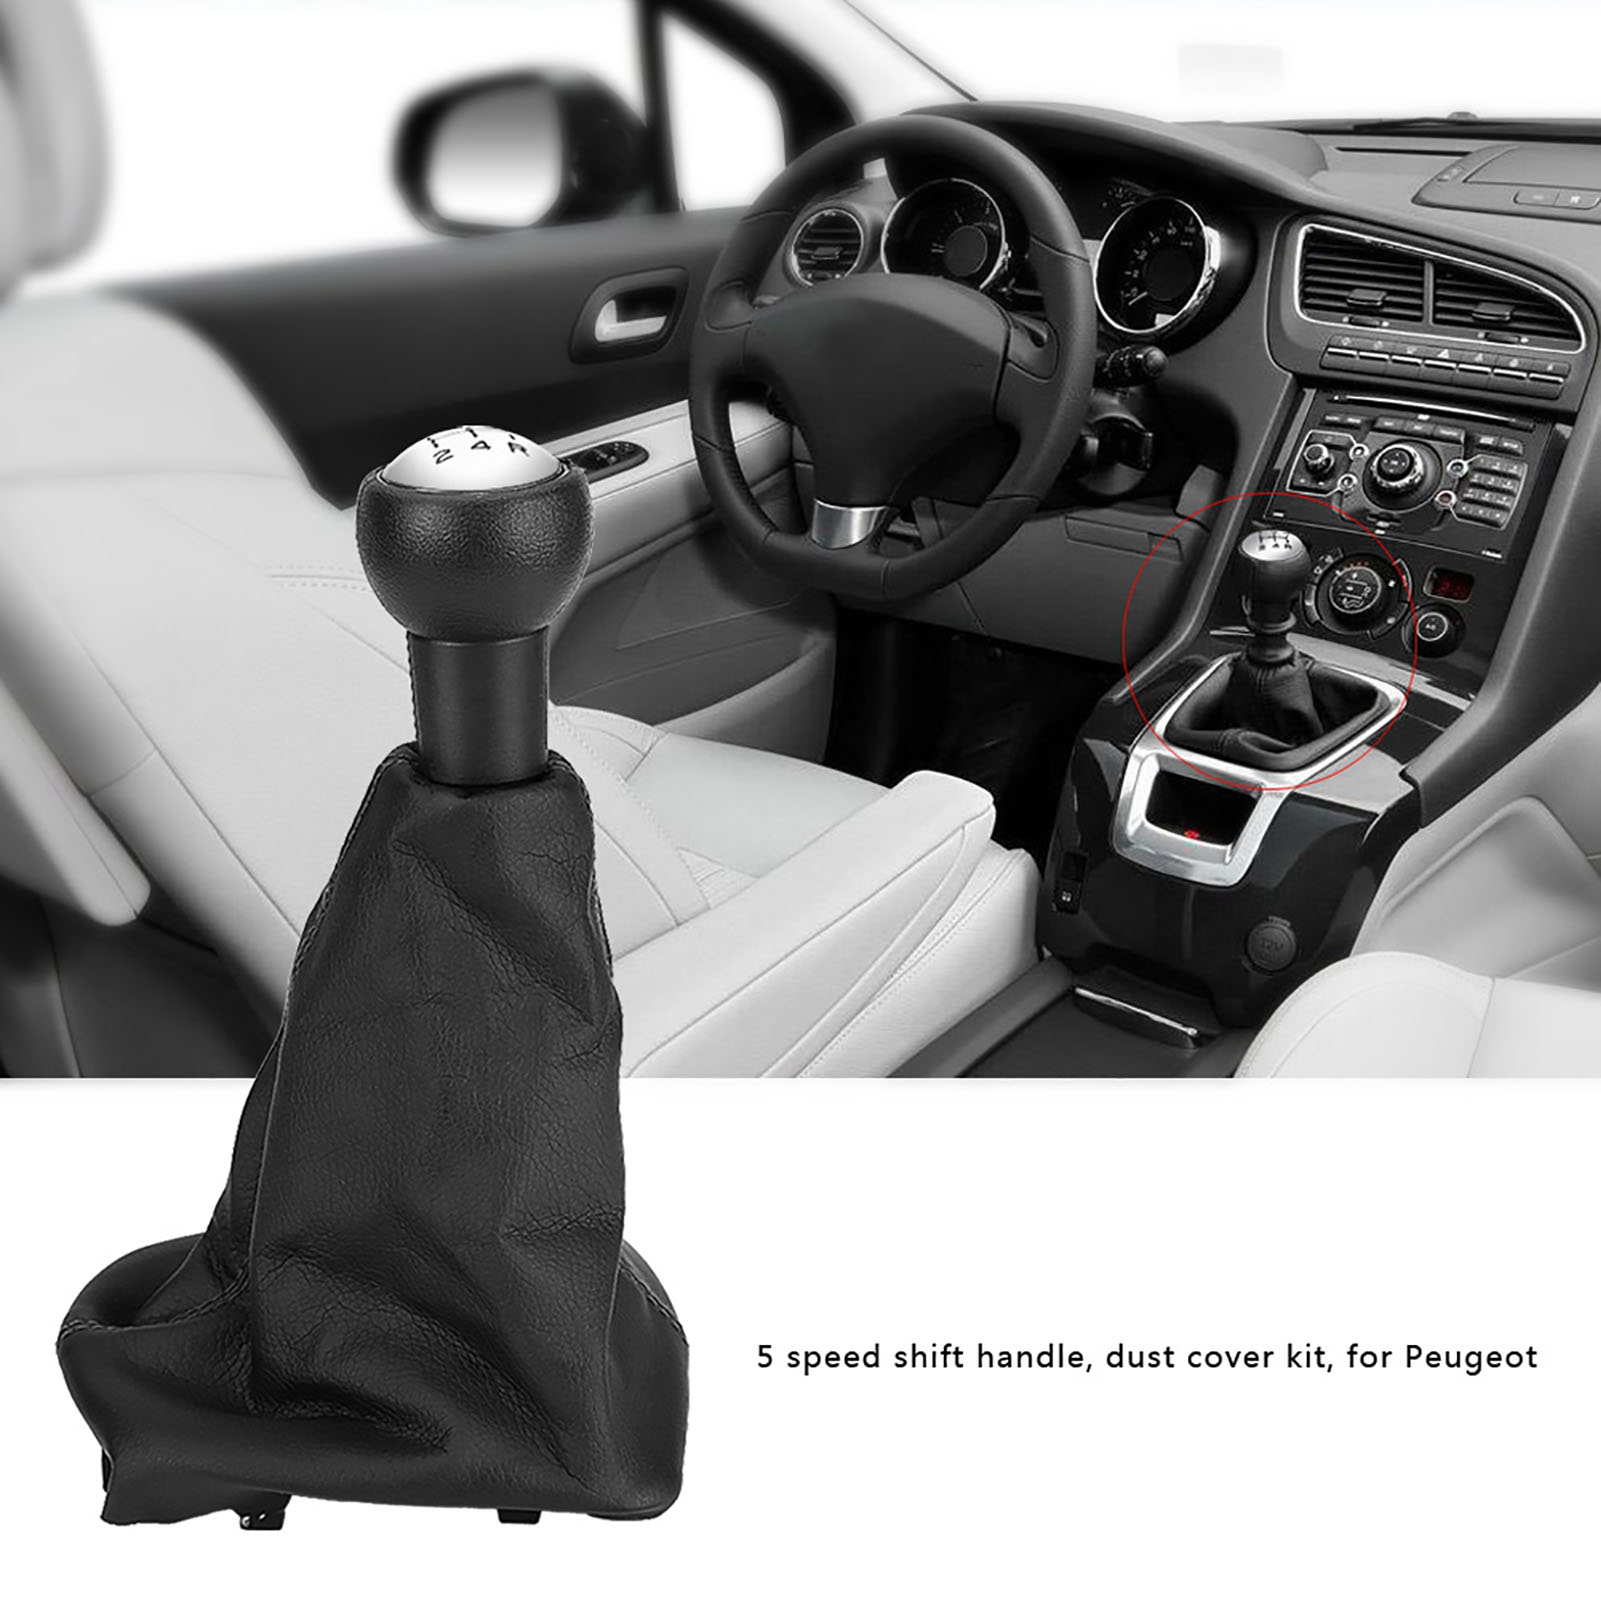 Leather Gear Shift Knob,5 Speed Gear Shift Stick Knob Dust-proof Cover Gaiter Boot Leather for Peugeot 207/307/406, Black Gear Shift